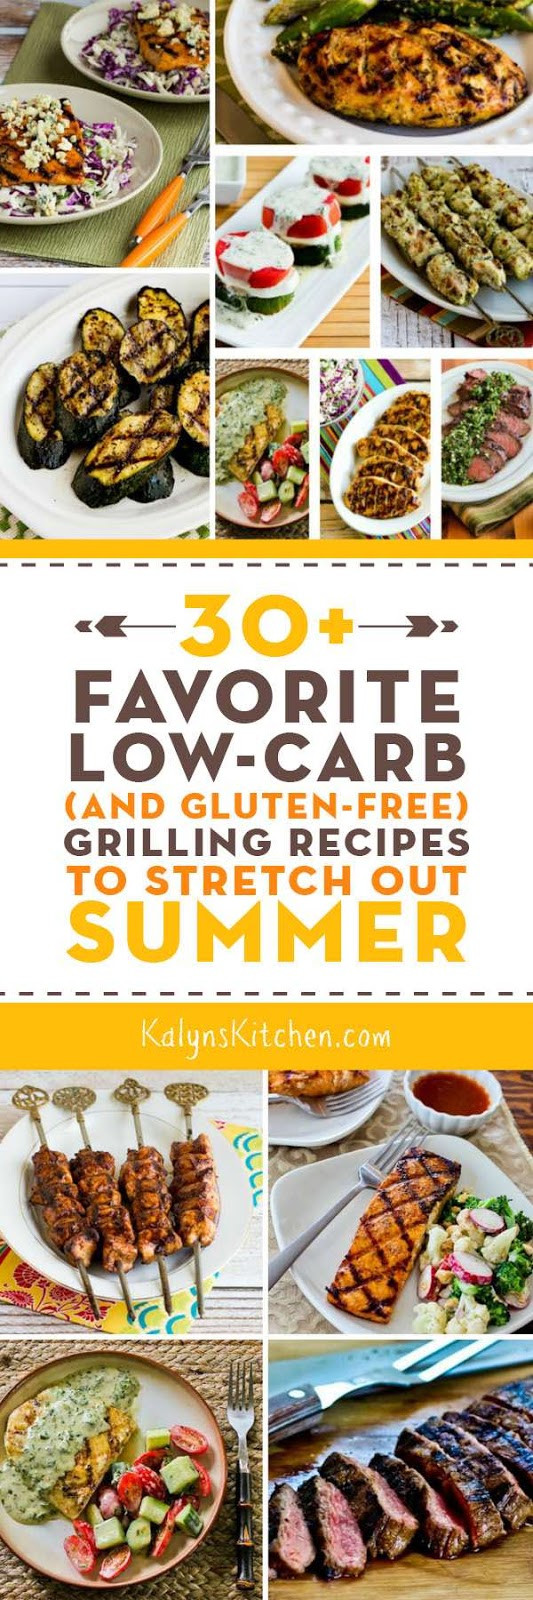 Low Carb Summer Recipes
 30 Favorite Low Carb and Gluten Free Grilling Recipes